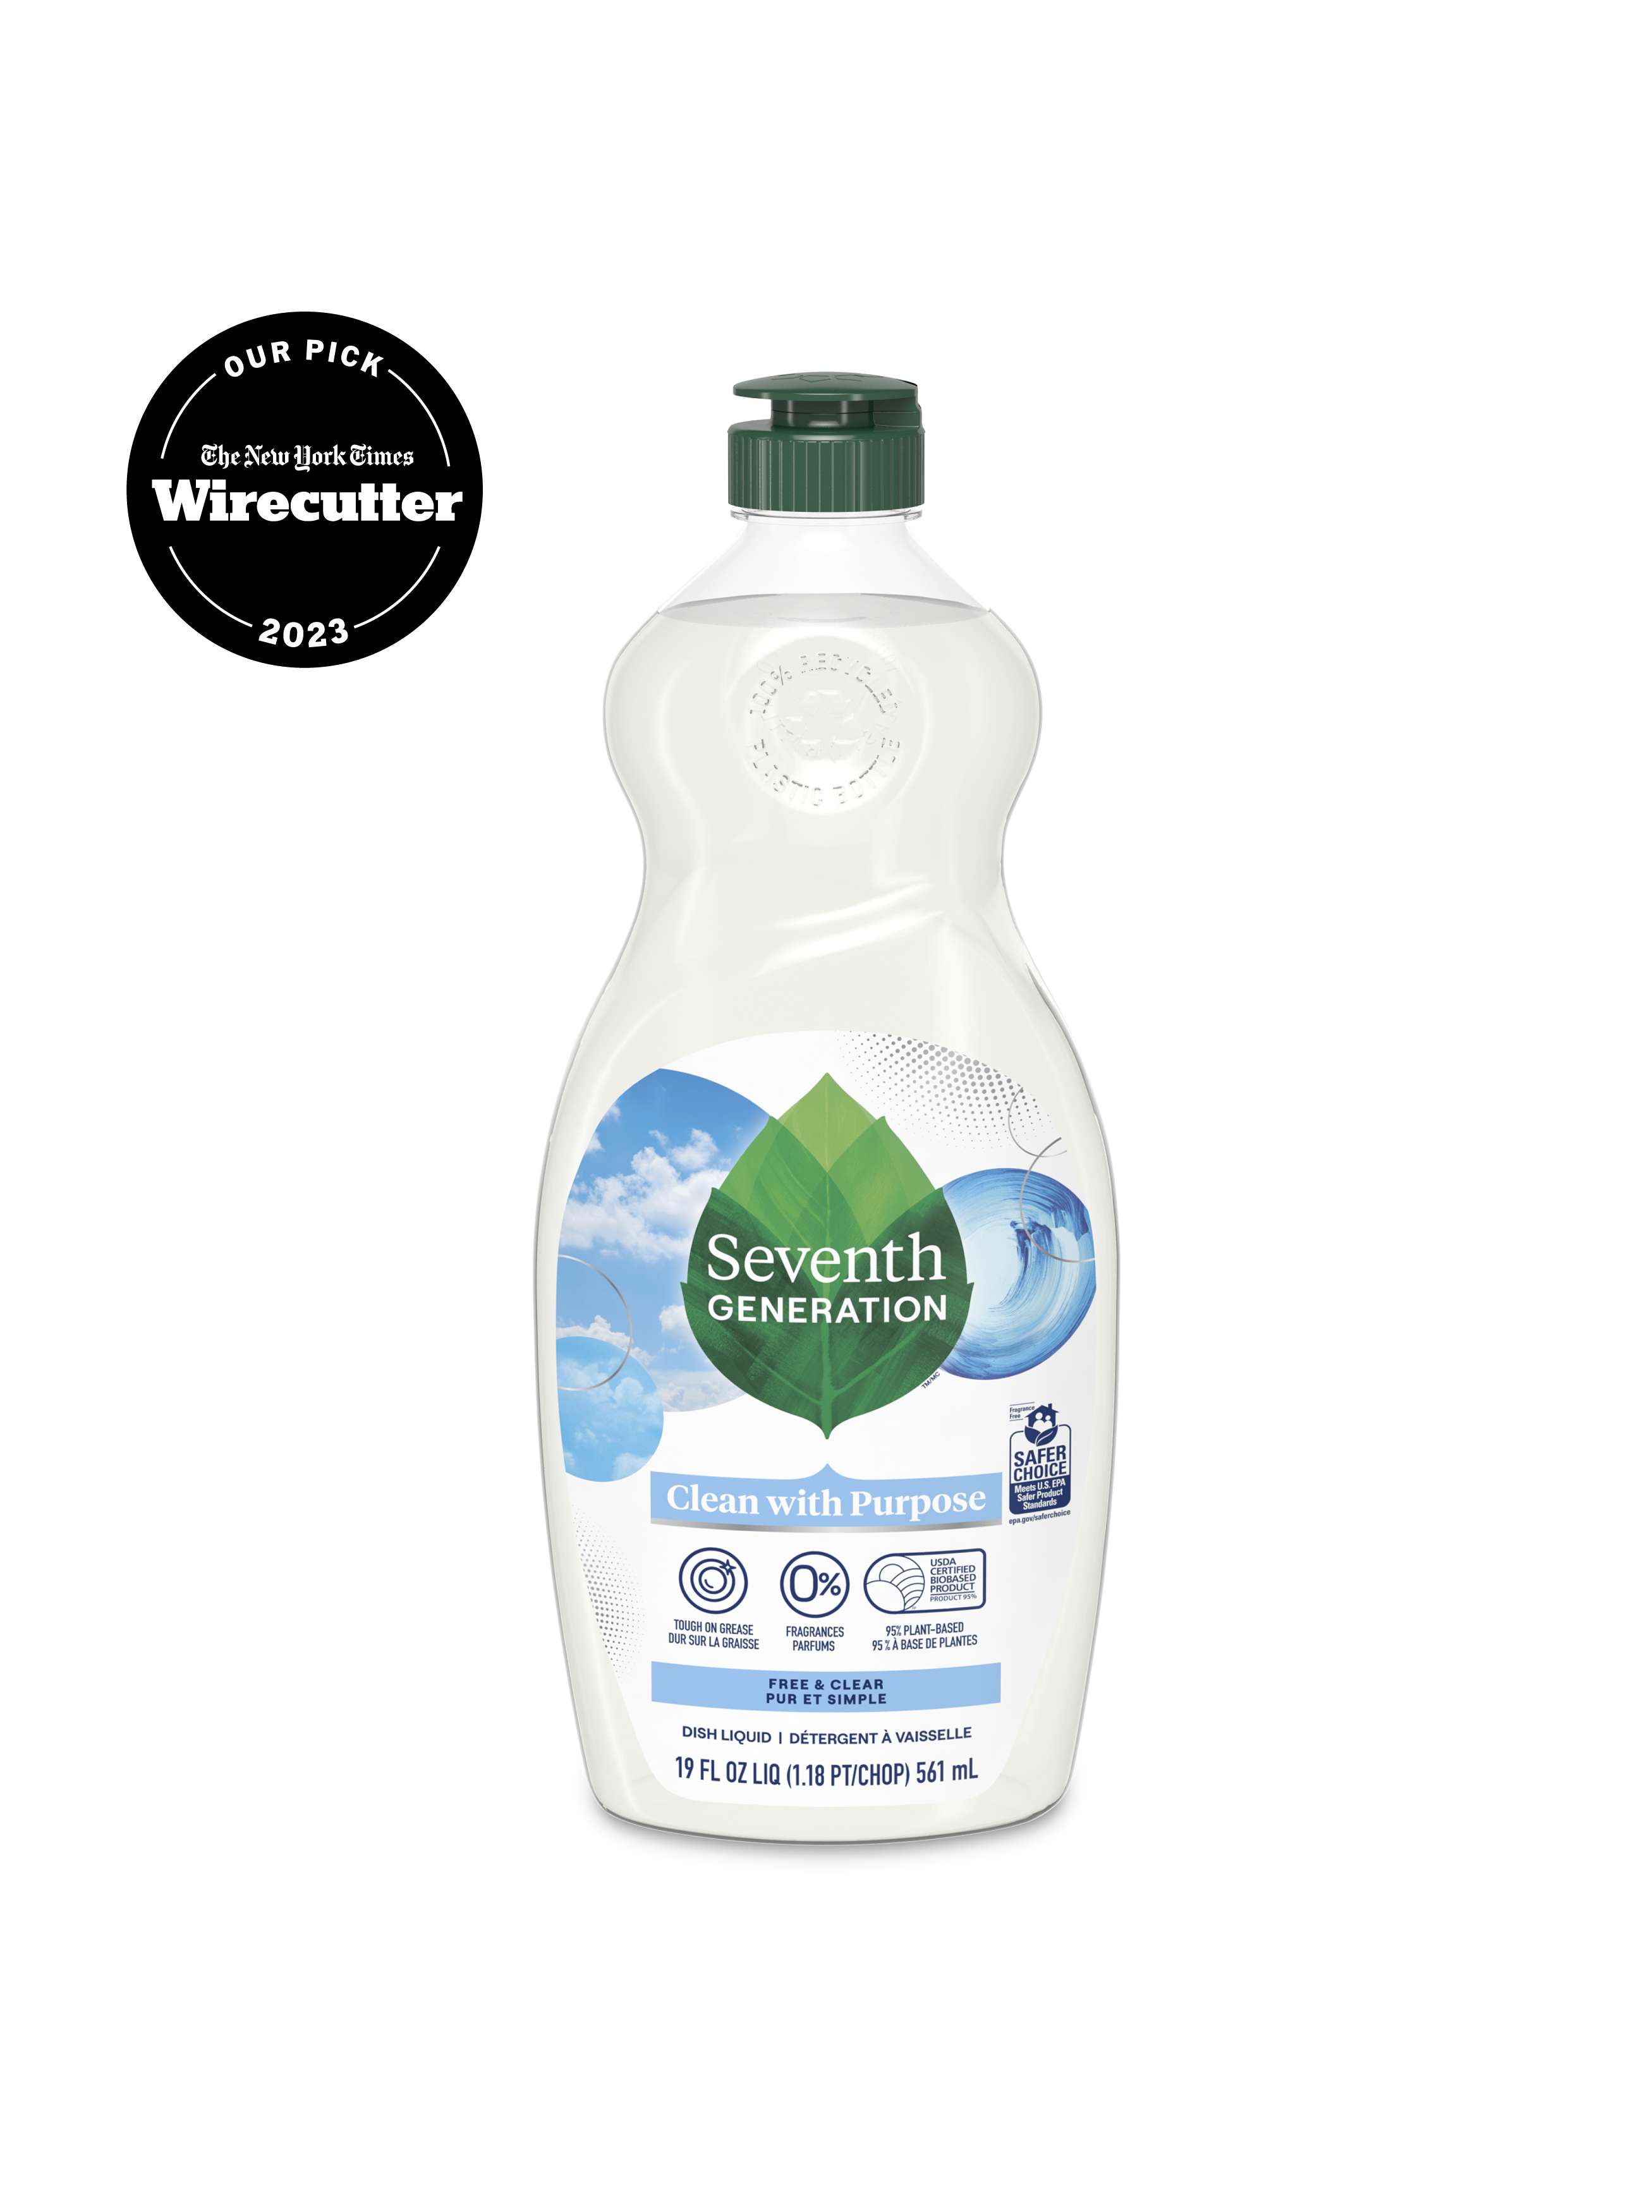 Seventh Generation Professional Liquid Hand Wash Soap Refill Free & Clear  Unscented 128 fl oz (Pack of 2)